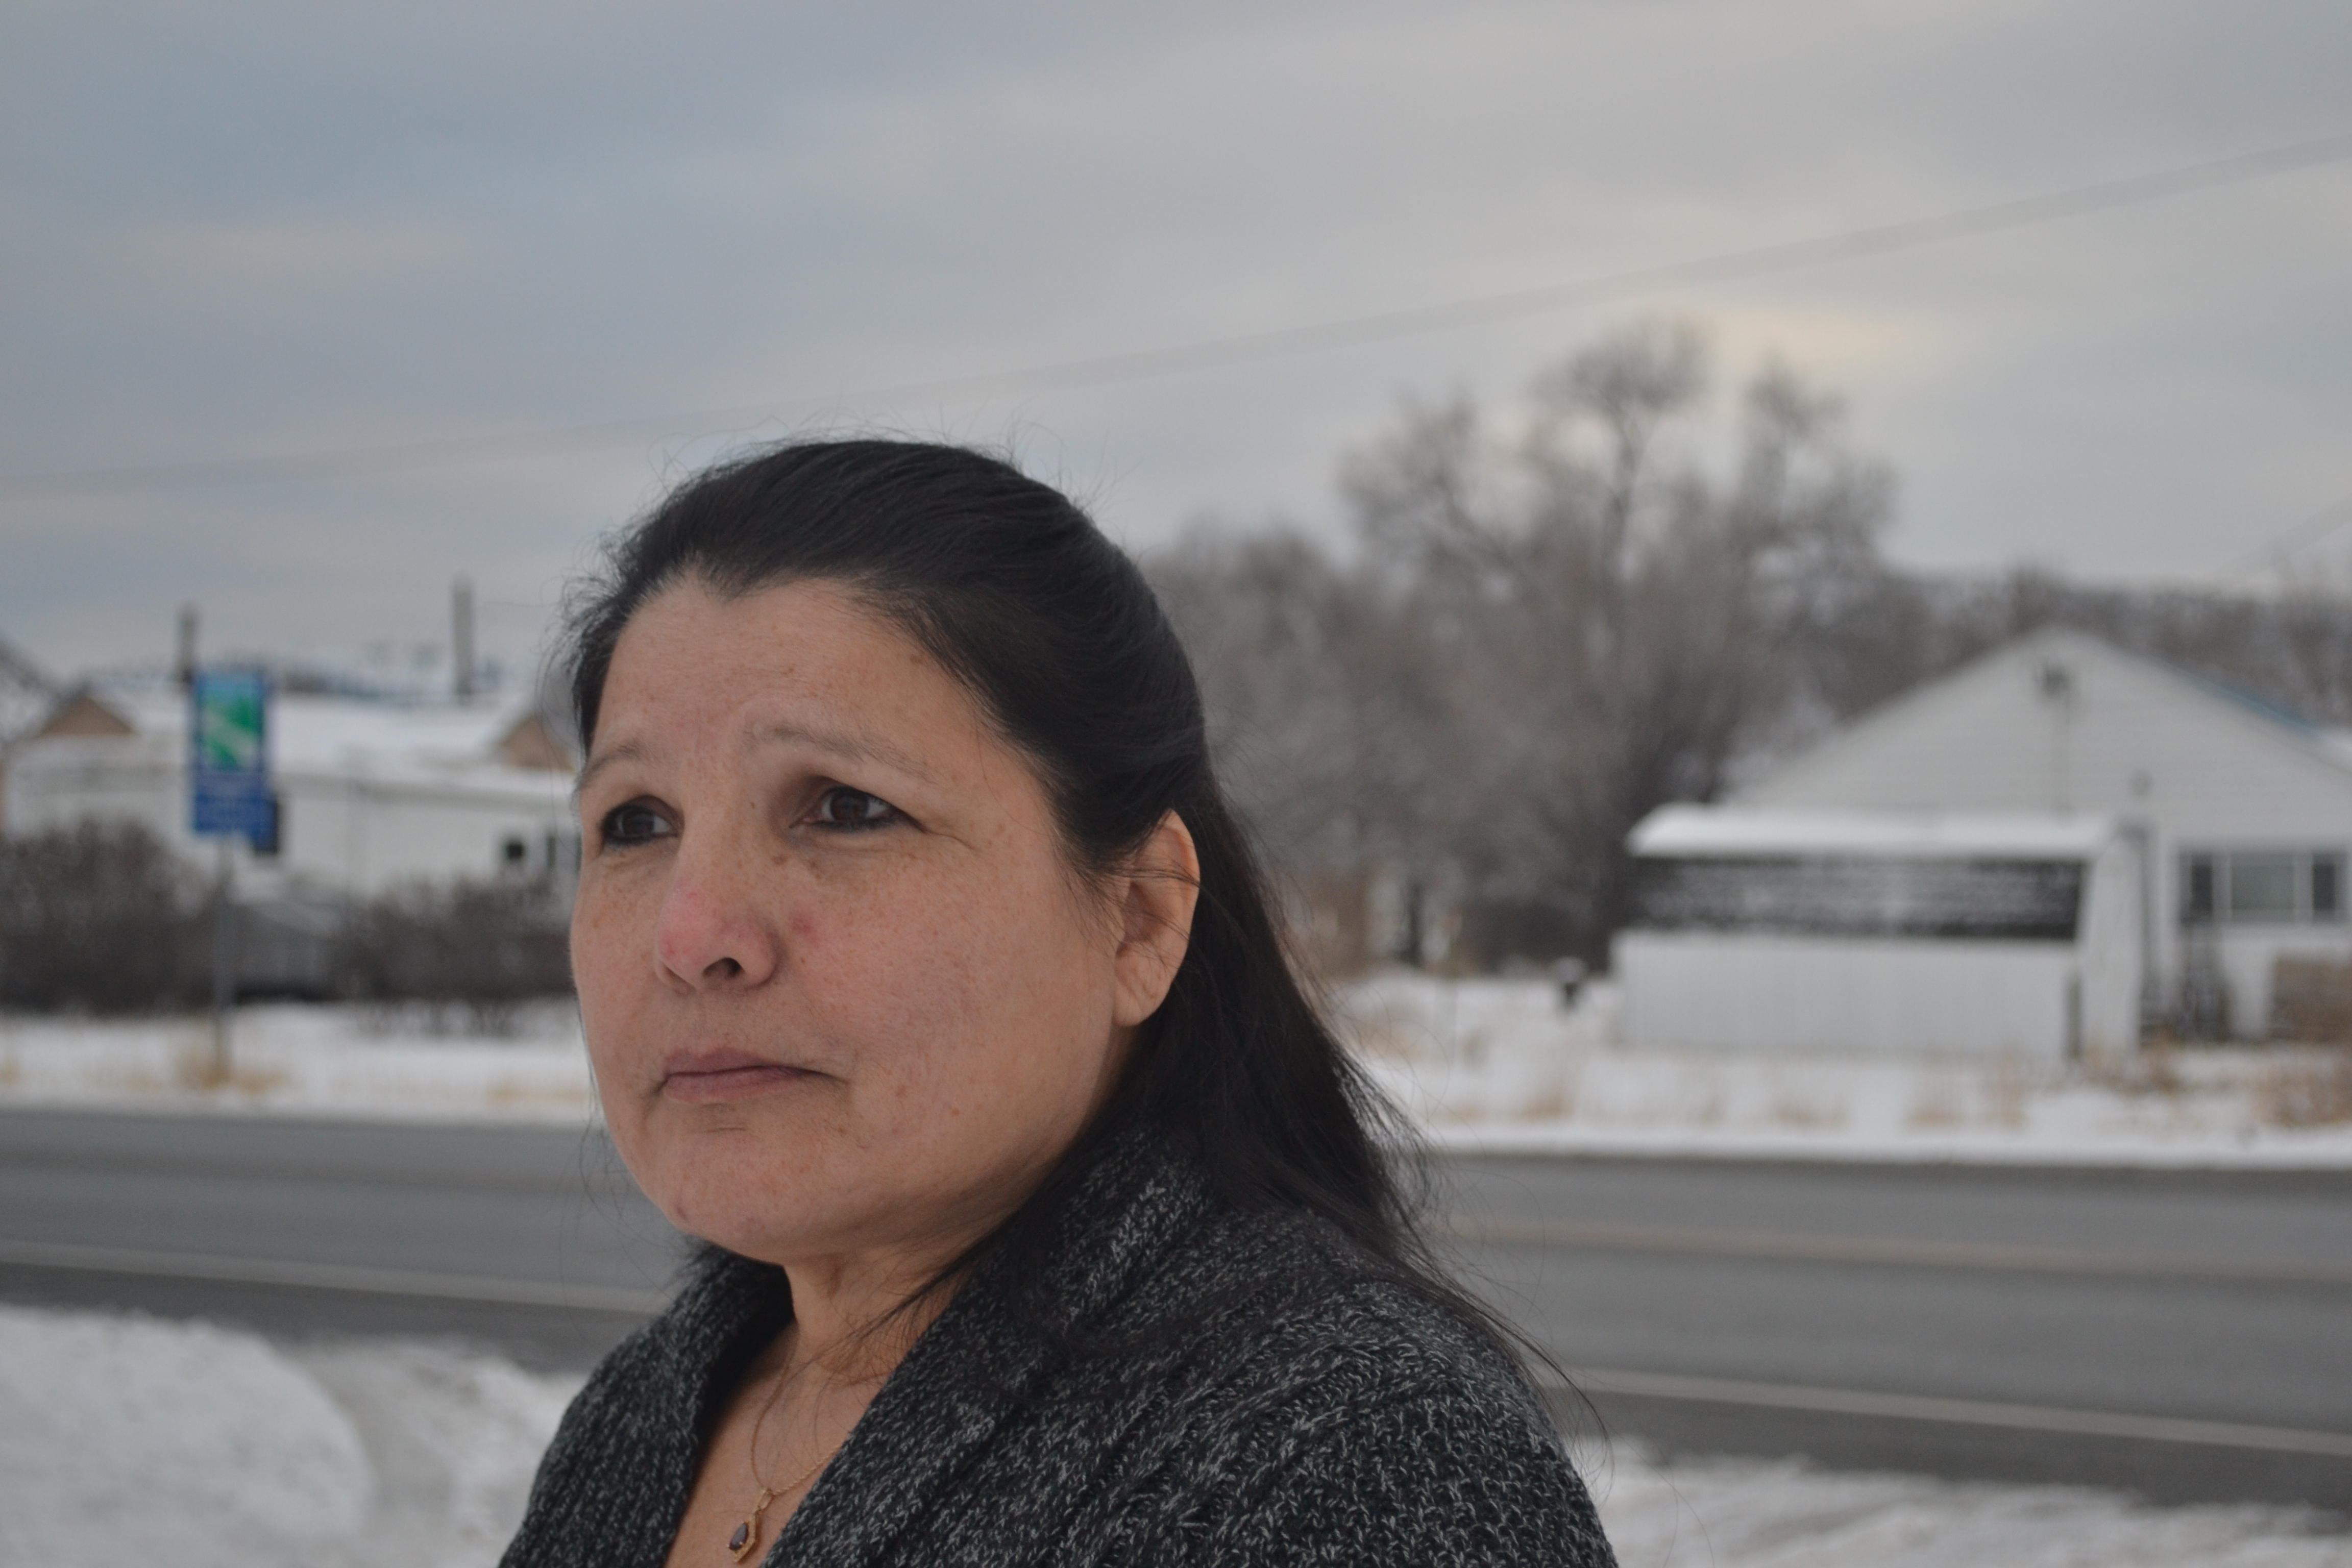 Norma Sanchez stands outside, near a highway